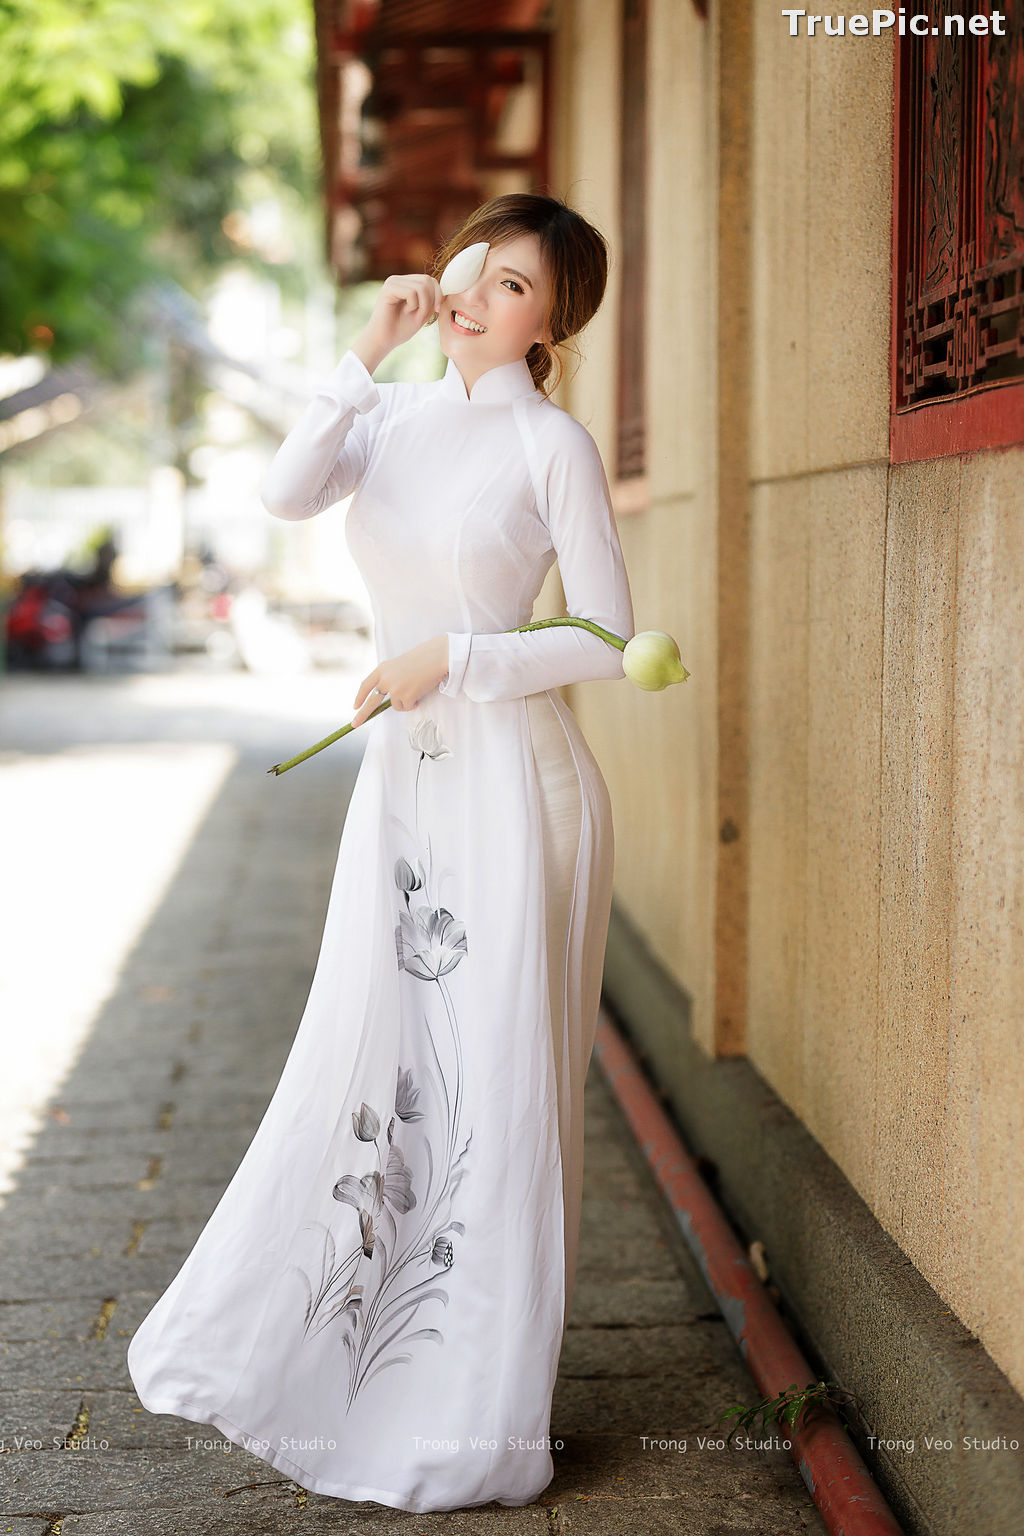 Image The Beauty of Vietnamese Girls with Traditional Dress (Ao Dai) #4 - TruePic.net - Picture-33